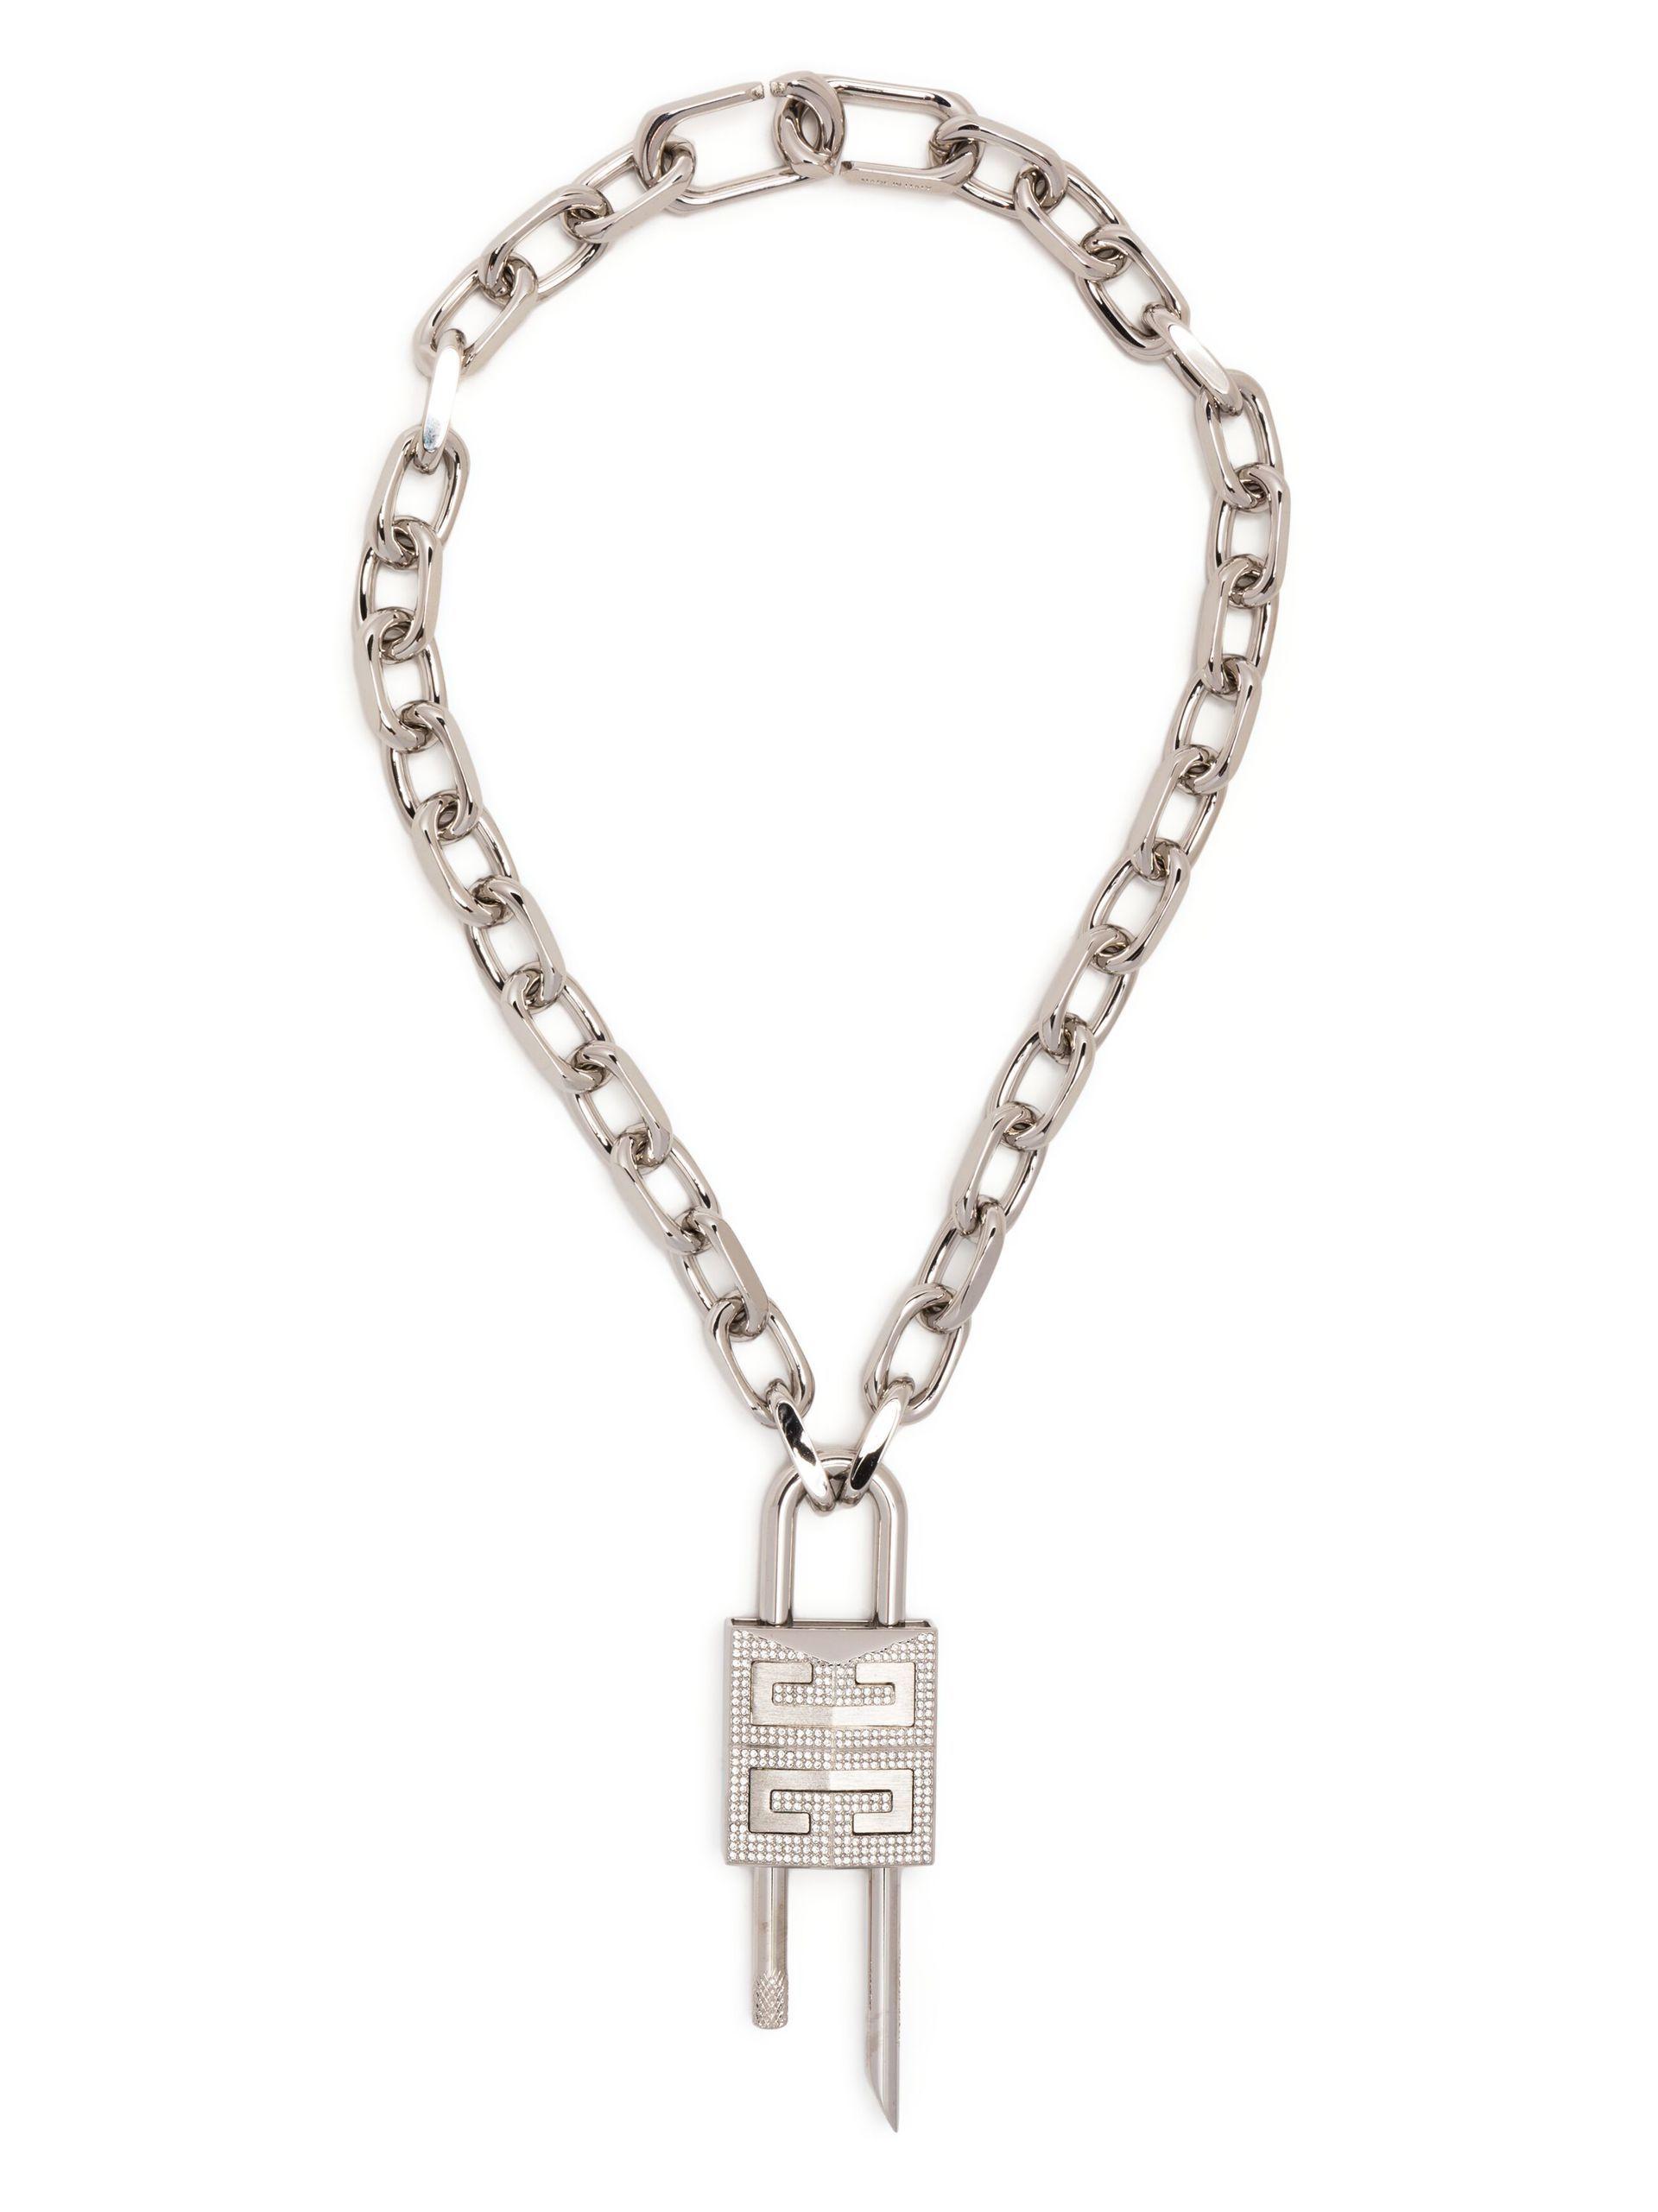 Givenchy 4G Lock Necklace in Golden Yellow | FWRD